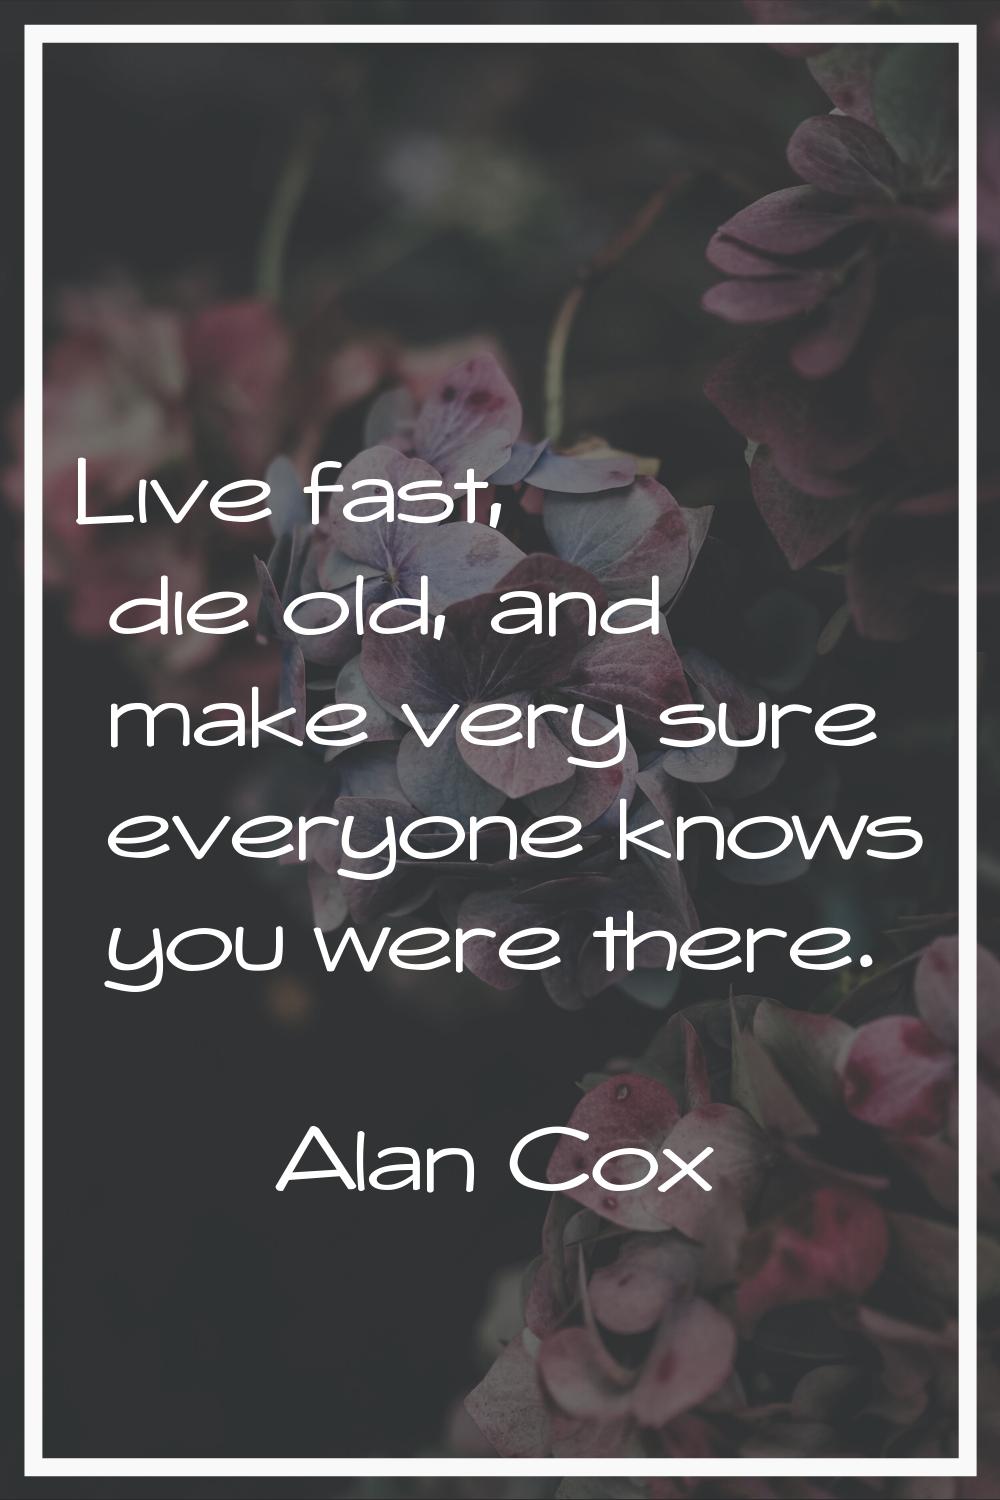 Live fast, die old, and make very sure everyone knows you were there.